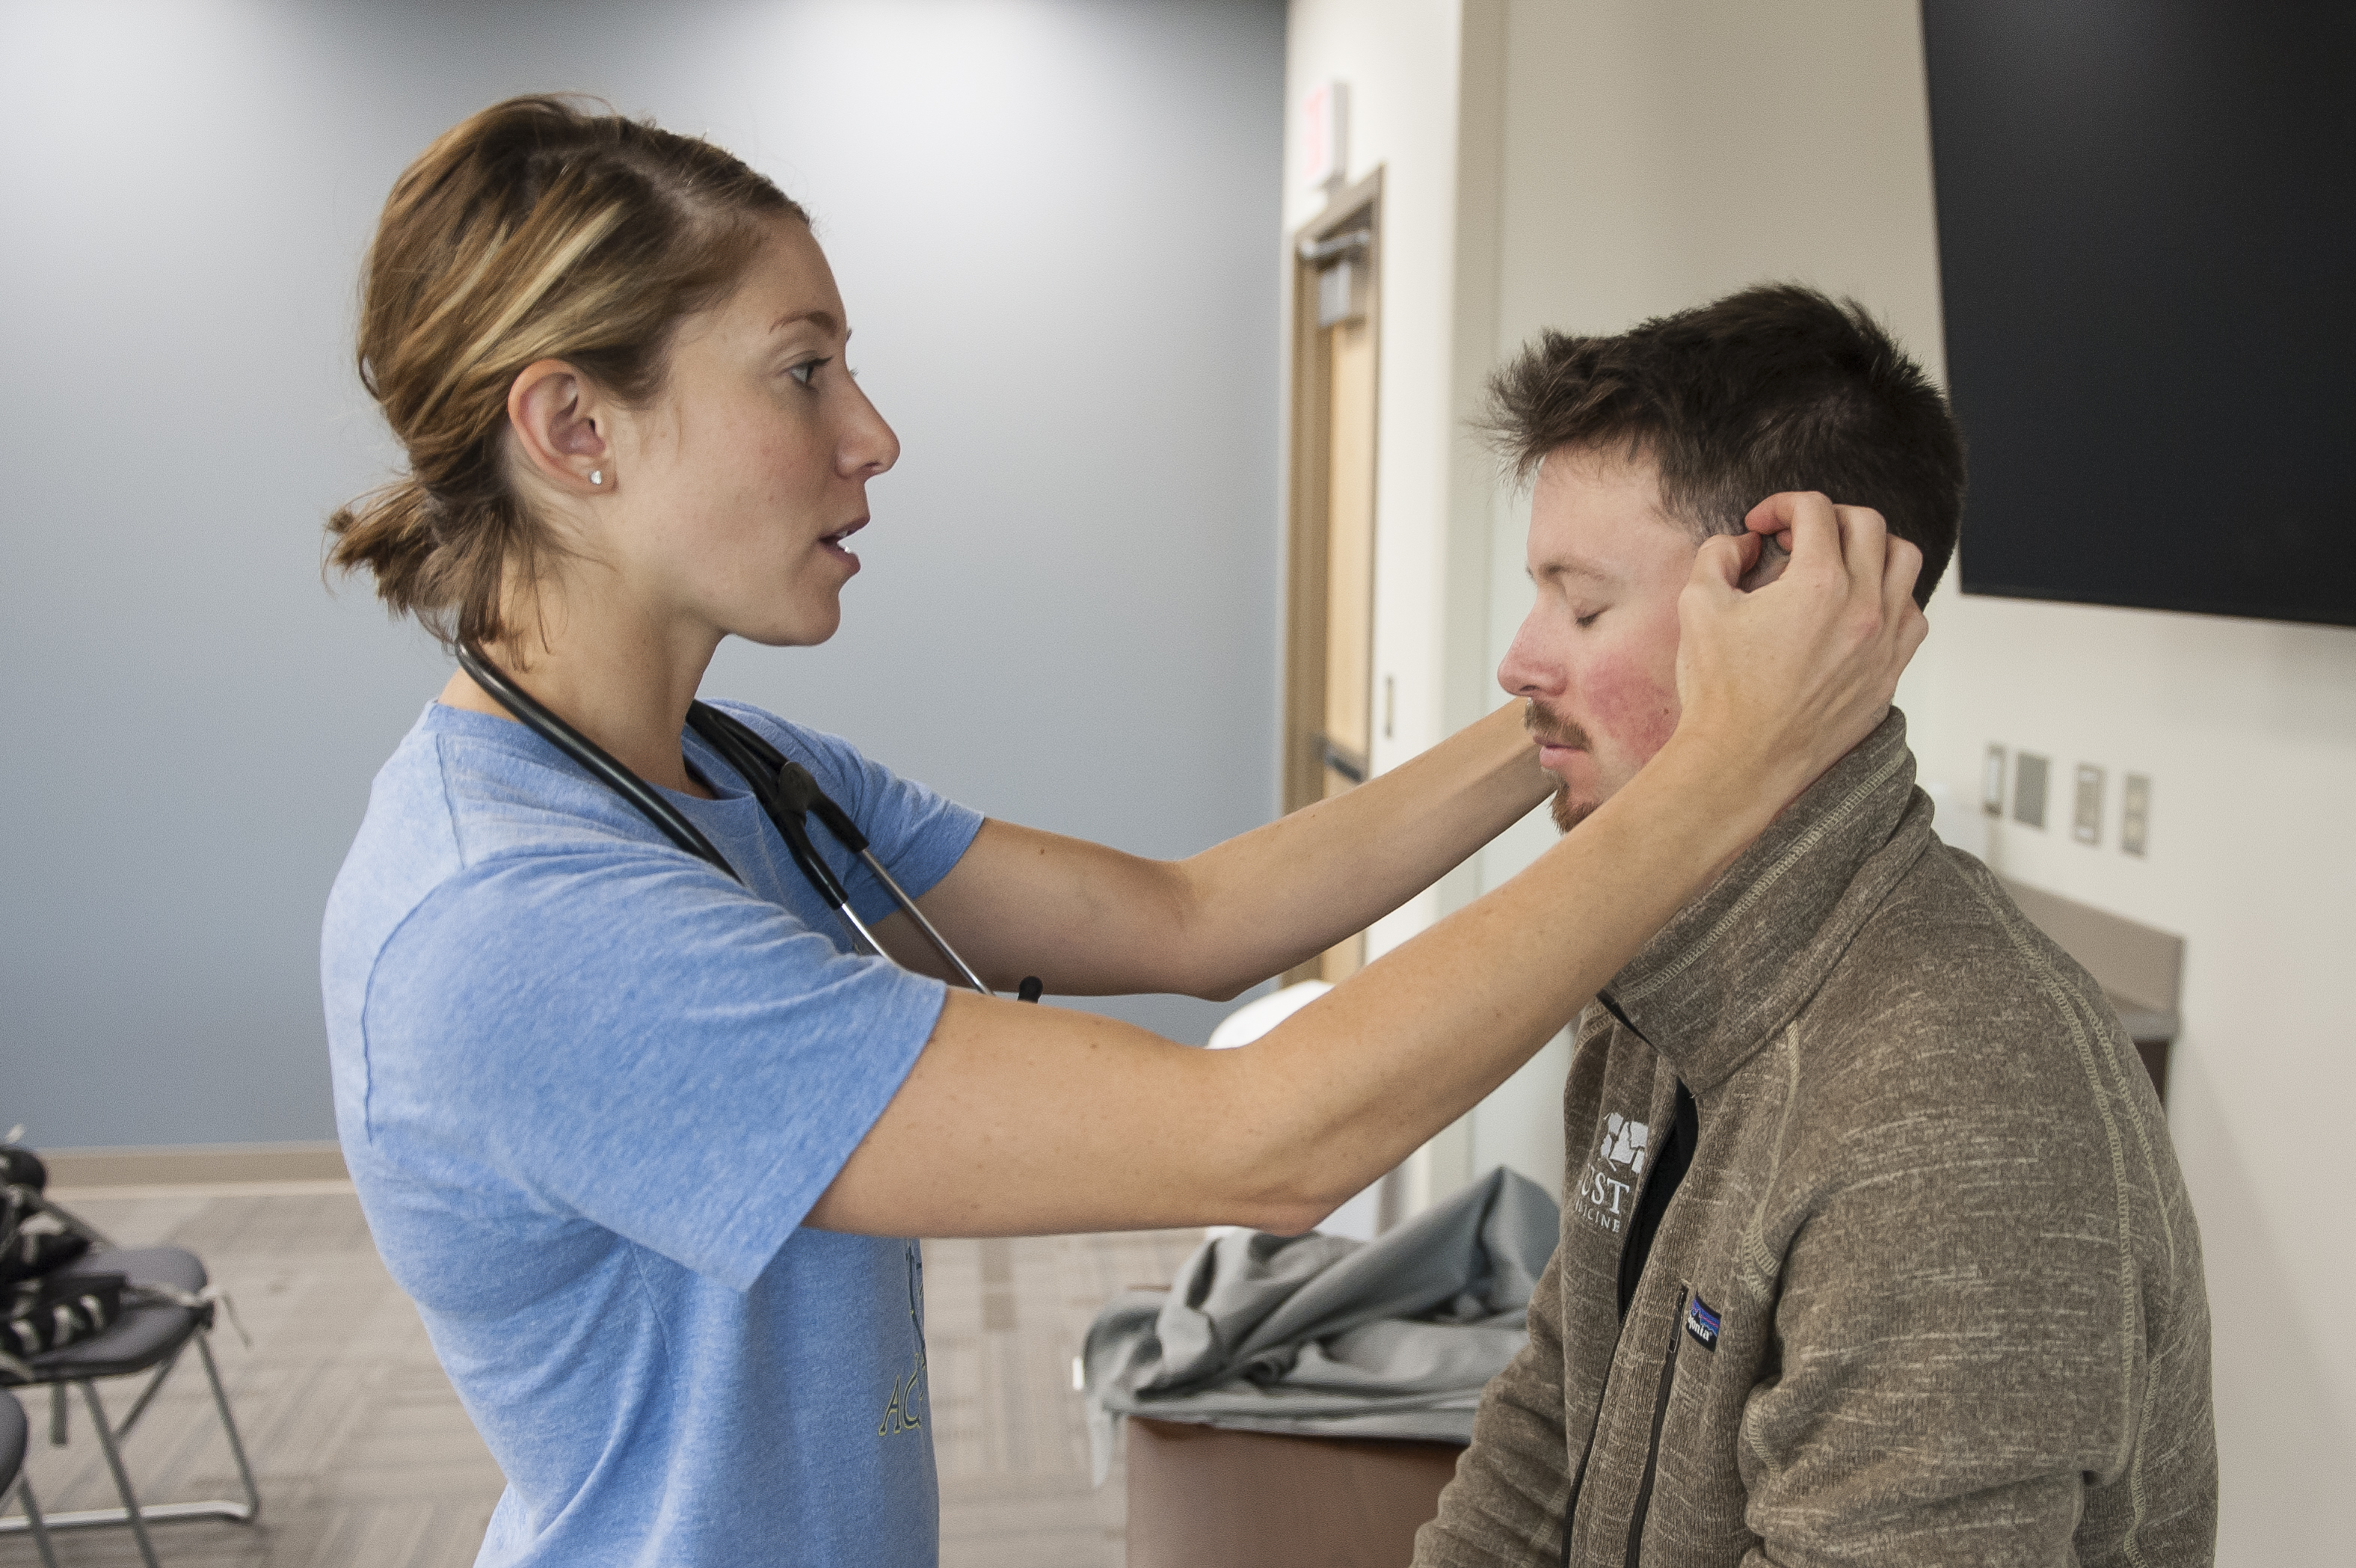 nursing student checking another student's head